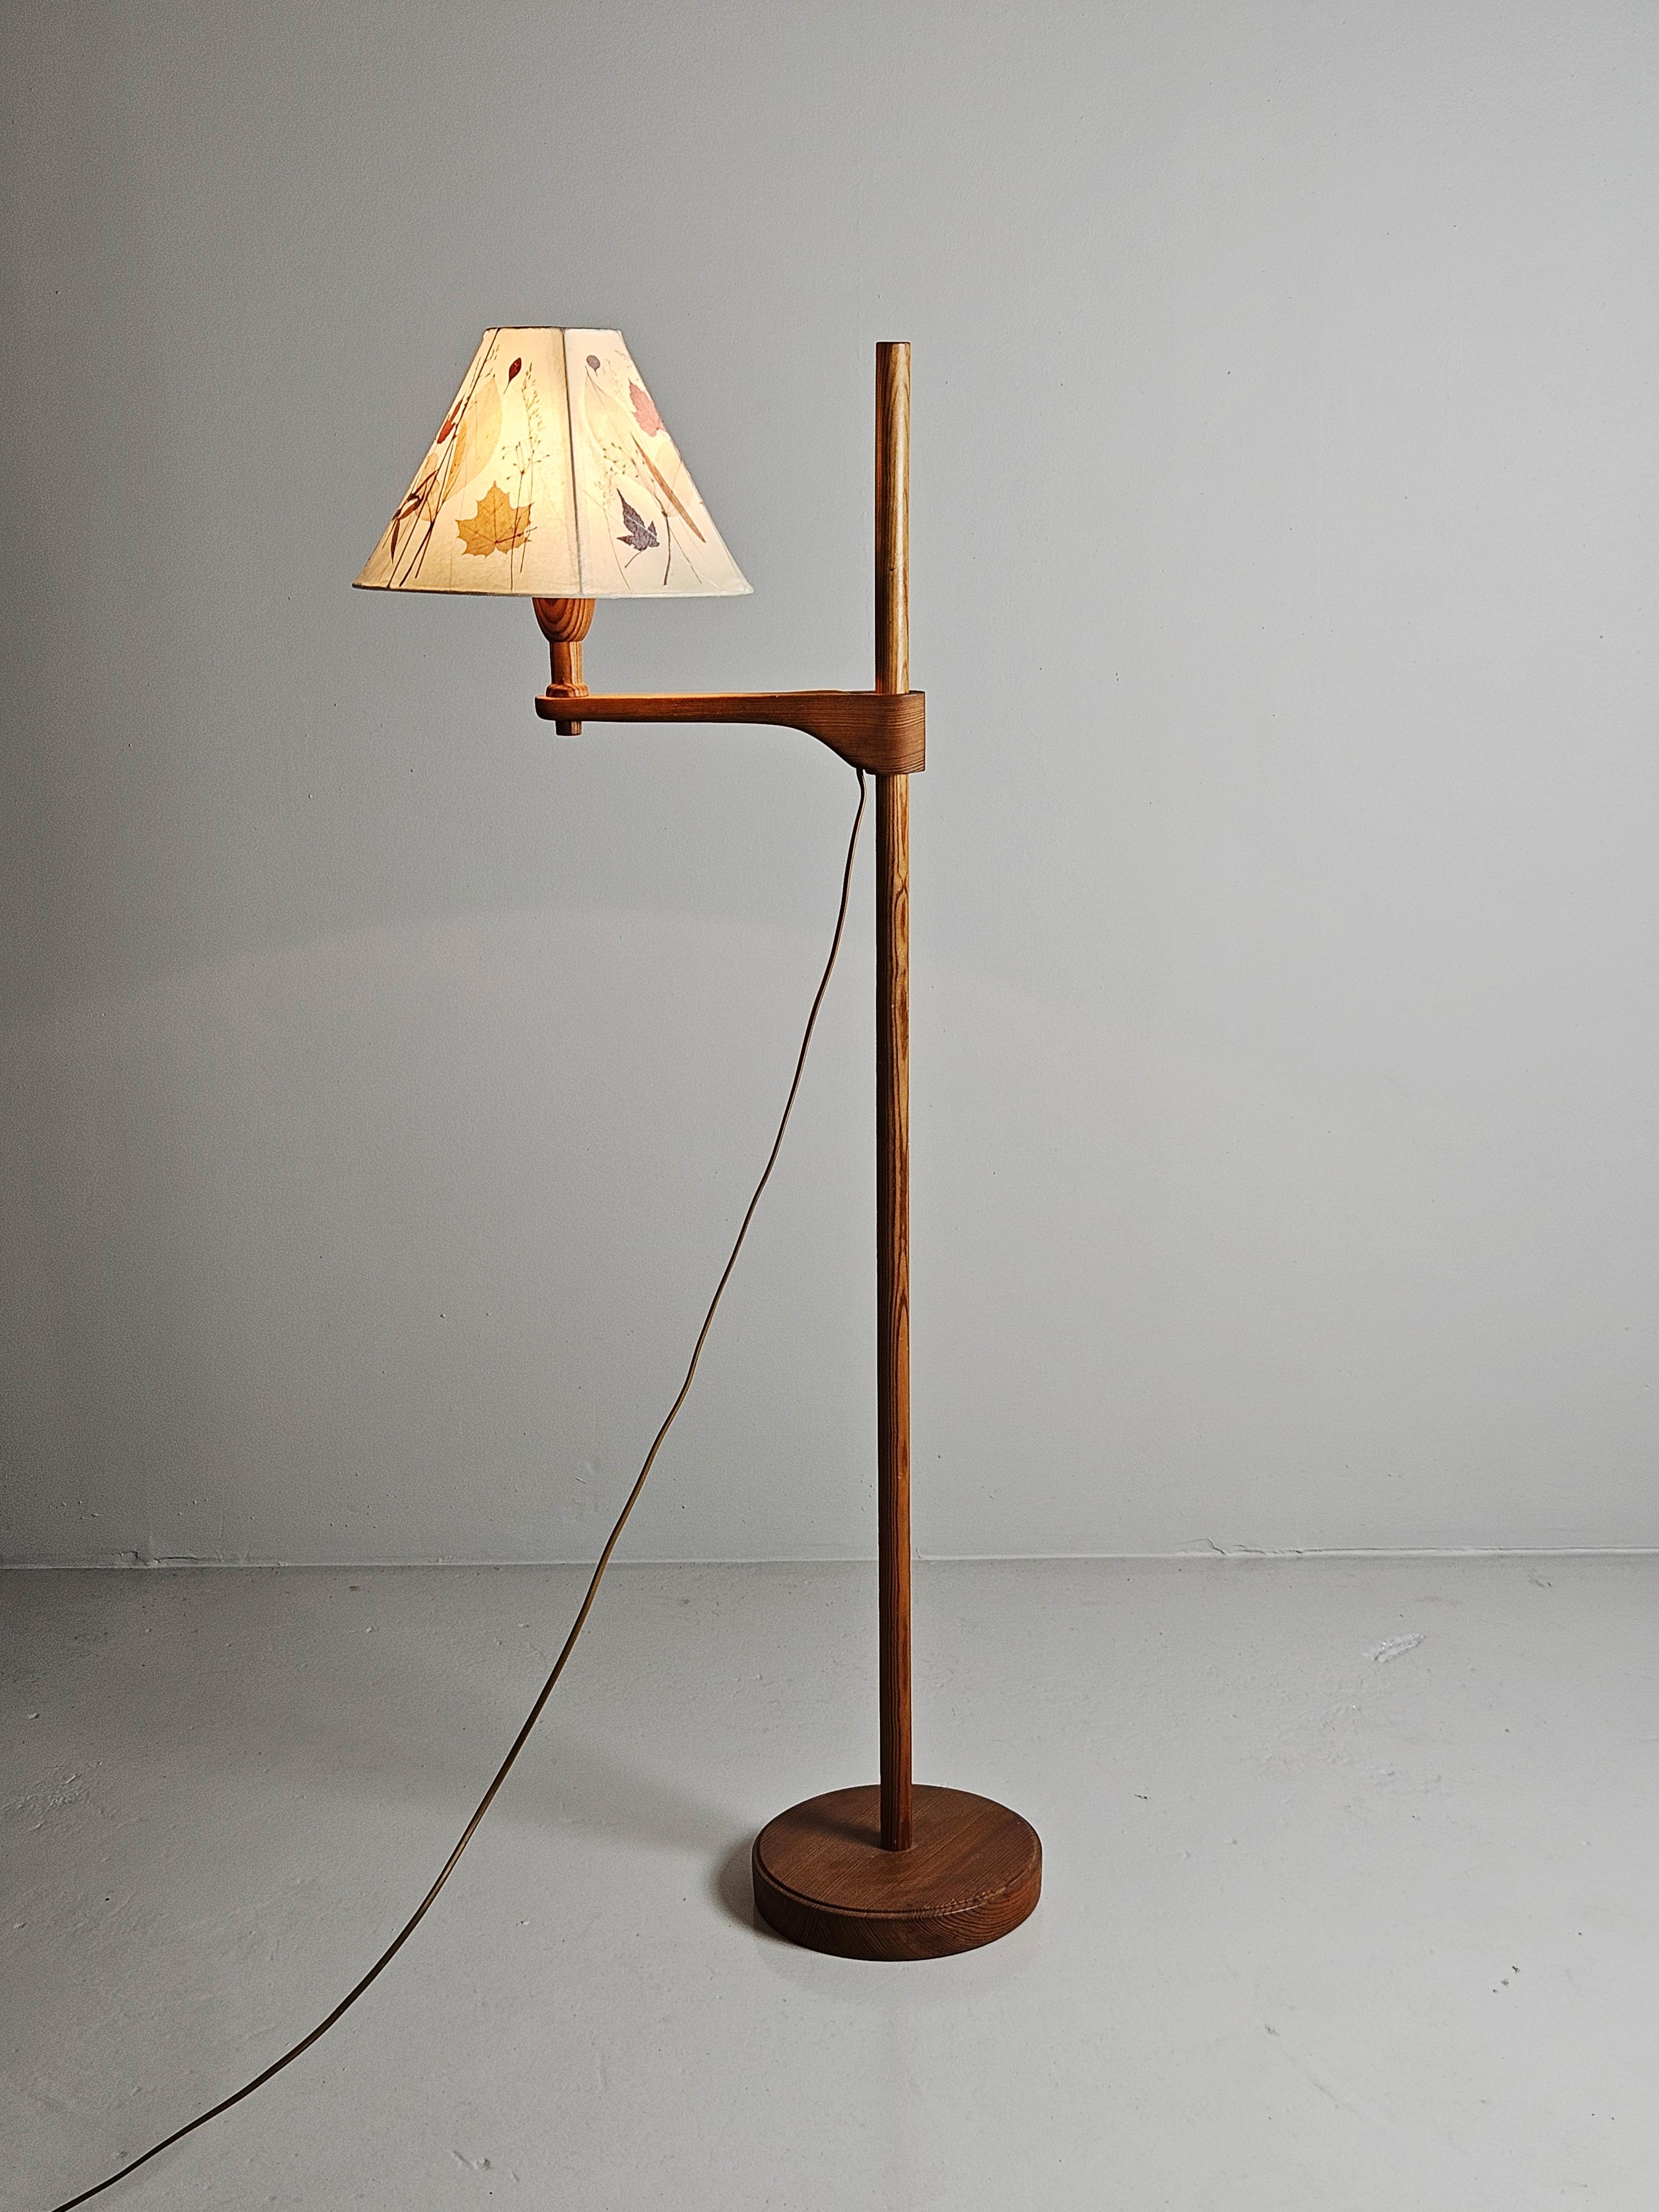 Beautiful floor lamp designed by Carl Malmsten during the 1940s.

Adjustable height. Made in pine with a beautiful shade with dryed flowers pressed on paper. 

